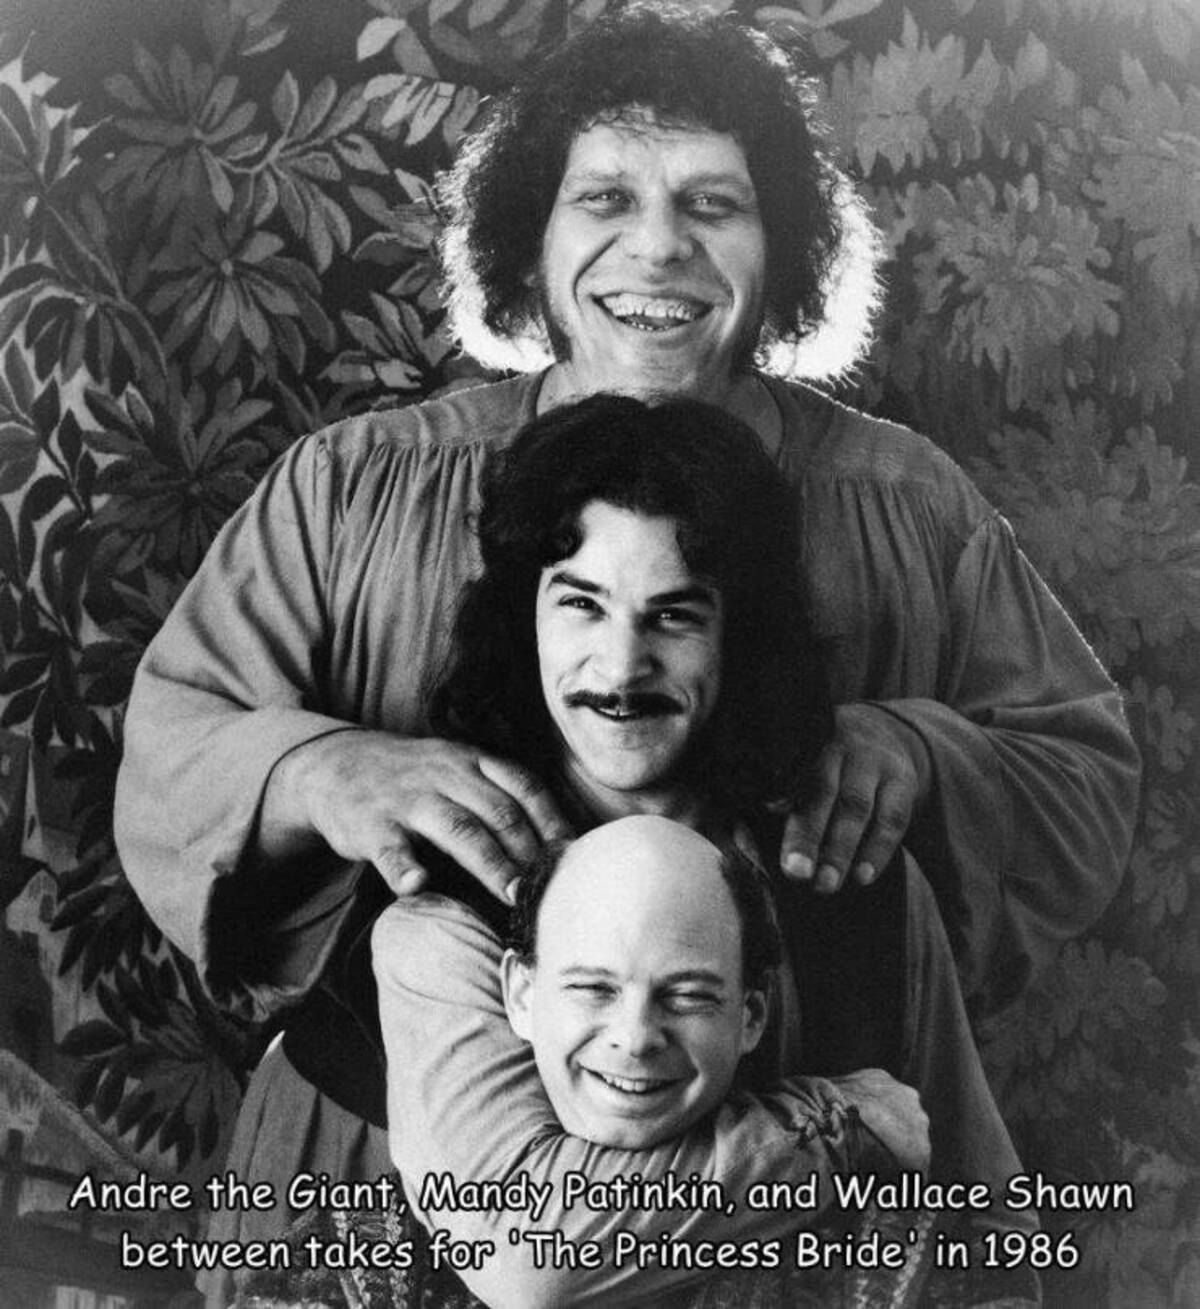 deborah eisenberg wallace shawn - Andre the Giant, Mandy Patinkin, and Wallace Shawn between takes for 'The Princess Bride in 1986